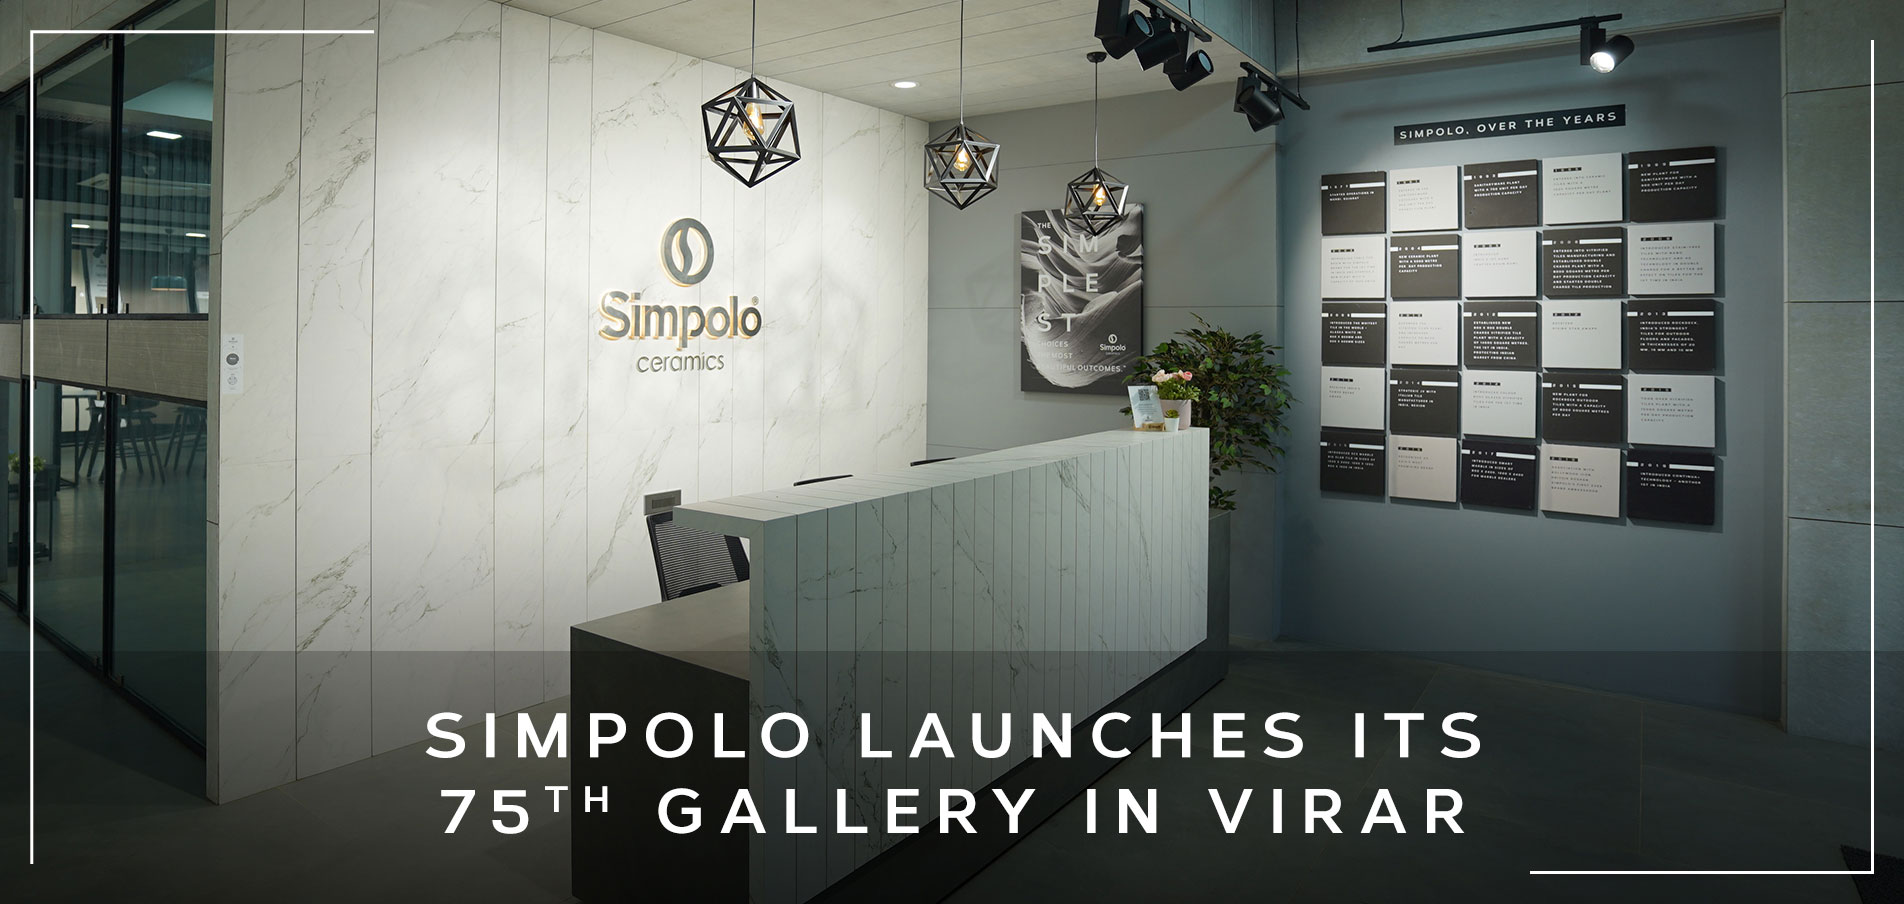 Simpolo Launches Its 75th Gallery In Virar